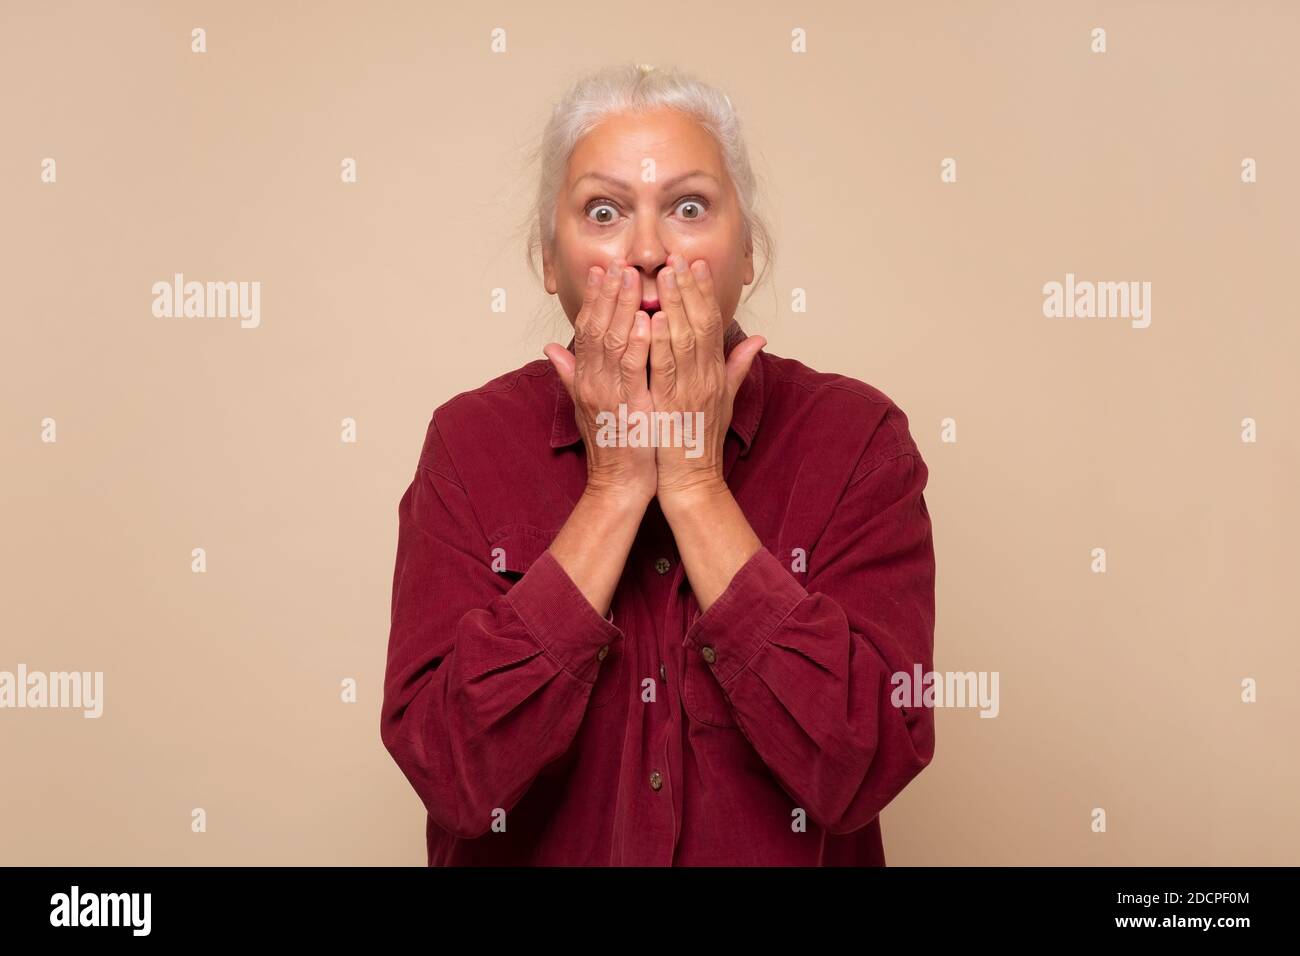 Senior woman being embarrassed, giggling covering mouth with hands Stock Photo